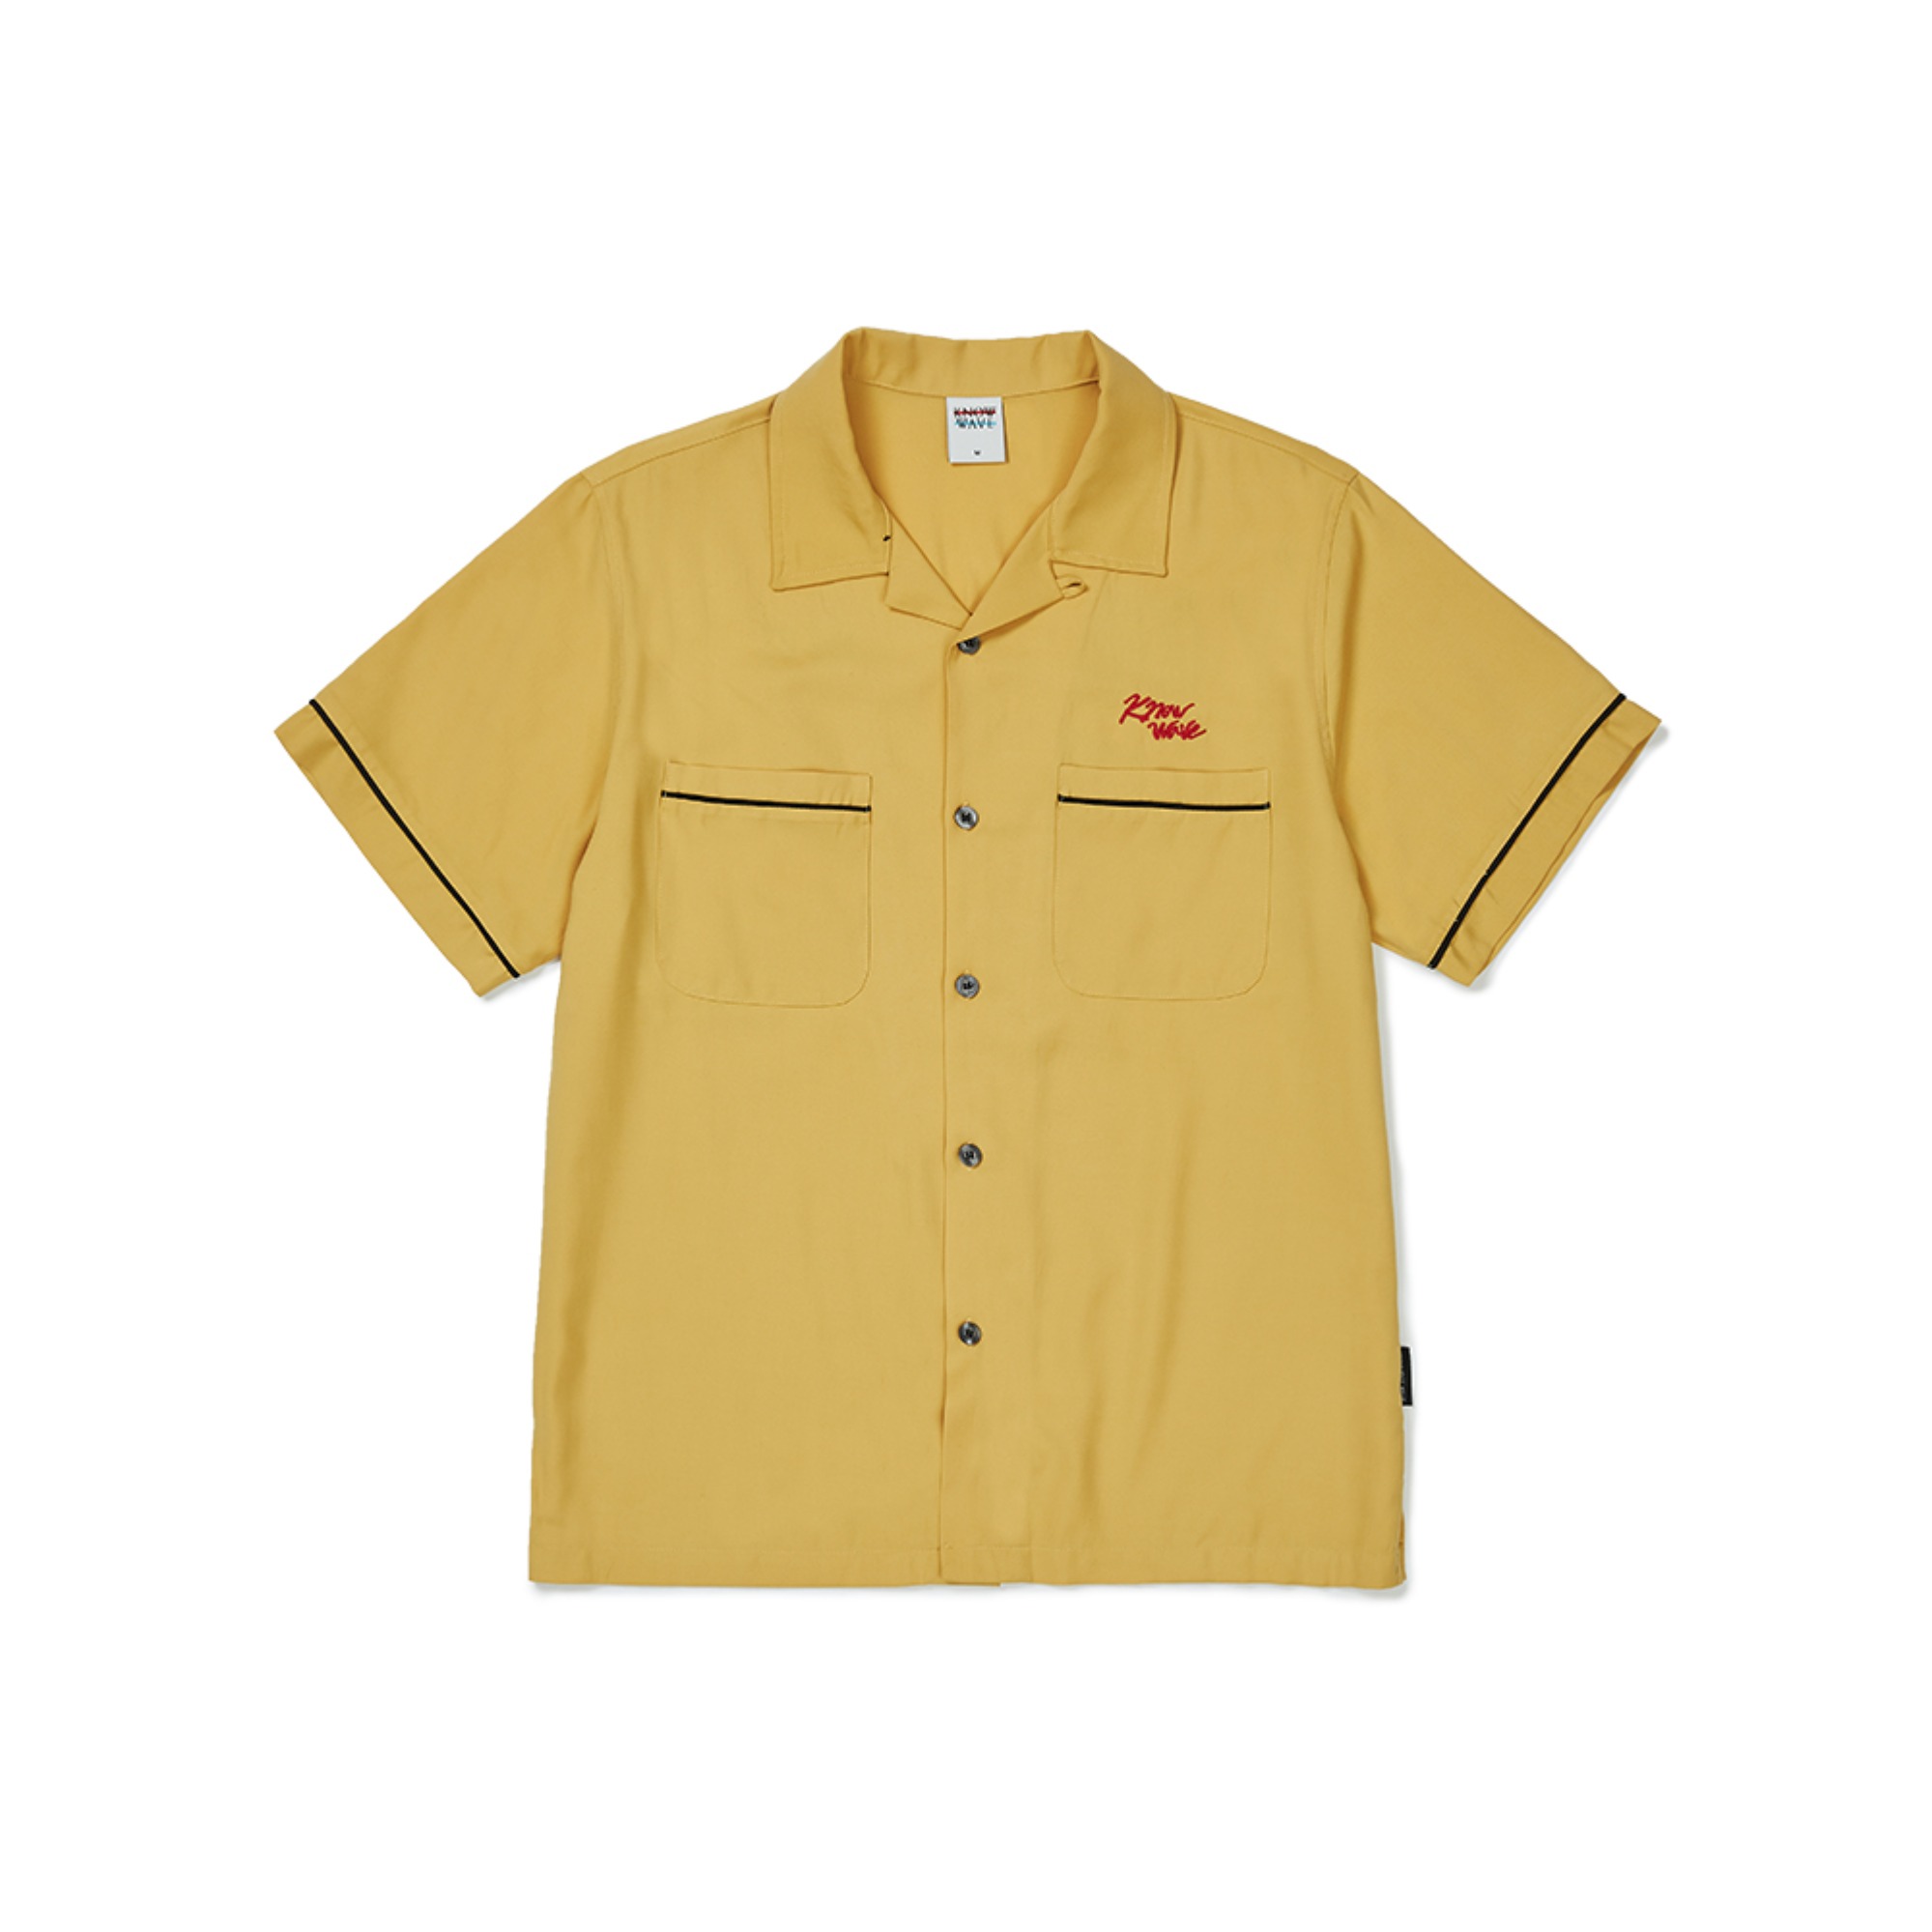 KNOW WAVE BOWLING SHIRT KNT020m(YELLOW)